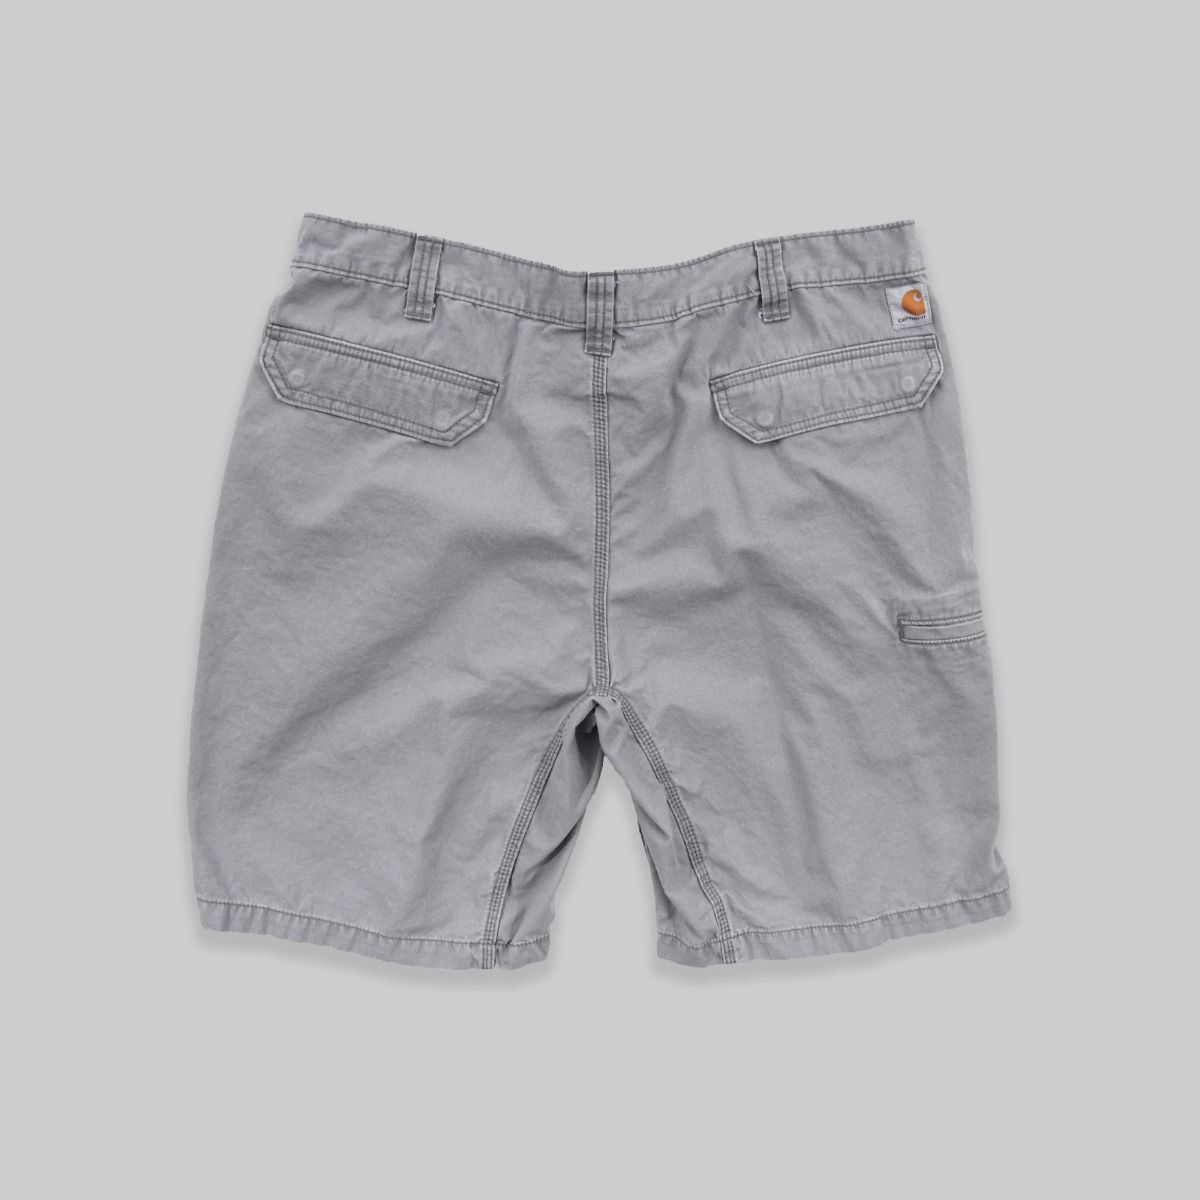 Carhartt Relaxed Fit Shorts